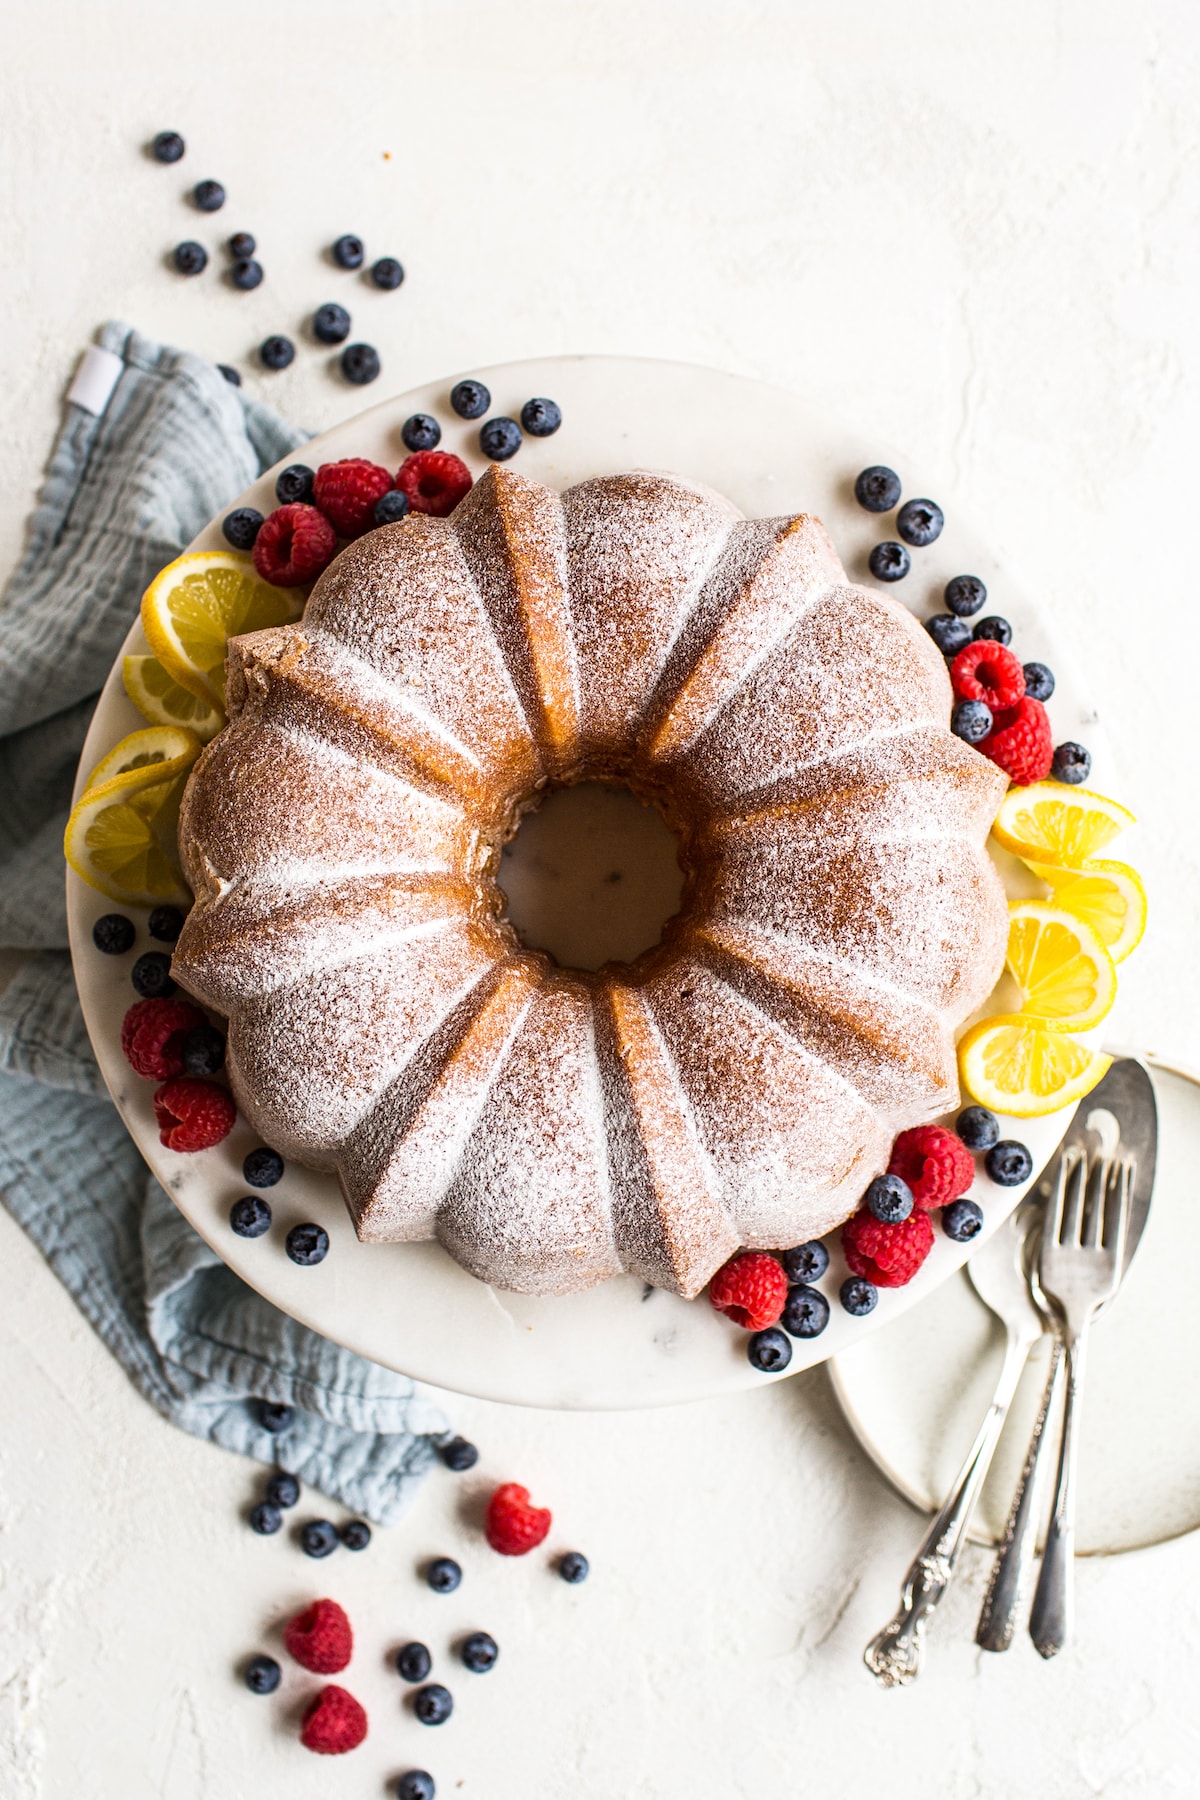 Bundt pound cake on a cake plate garnished with powdered sugar, berries and lemon. A napkin, more berries, and serving utensils are beside the cake plate.